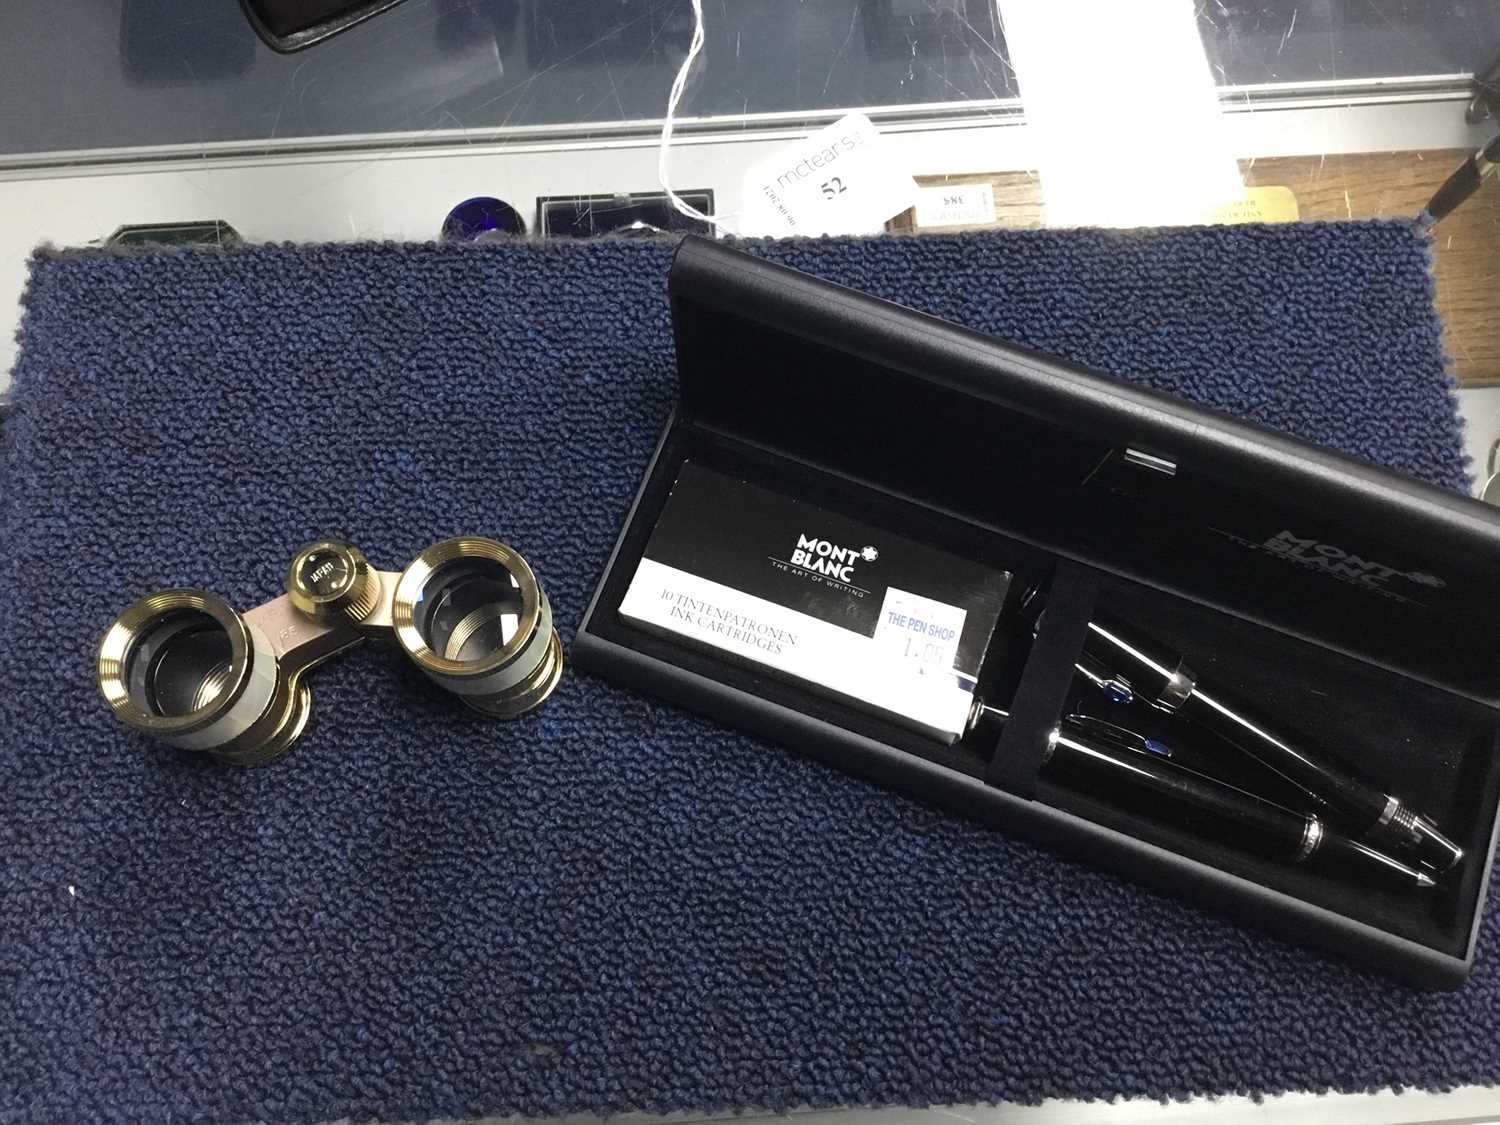 Lot 52 - A MONT BLANC PEN AND PENCIL SET, OTHER PENS AND A PAIR OF OPERA GLASSES